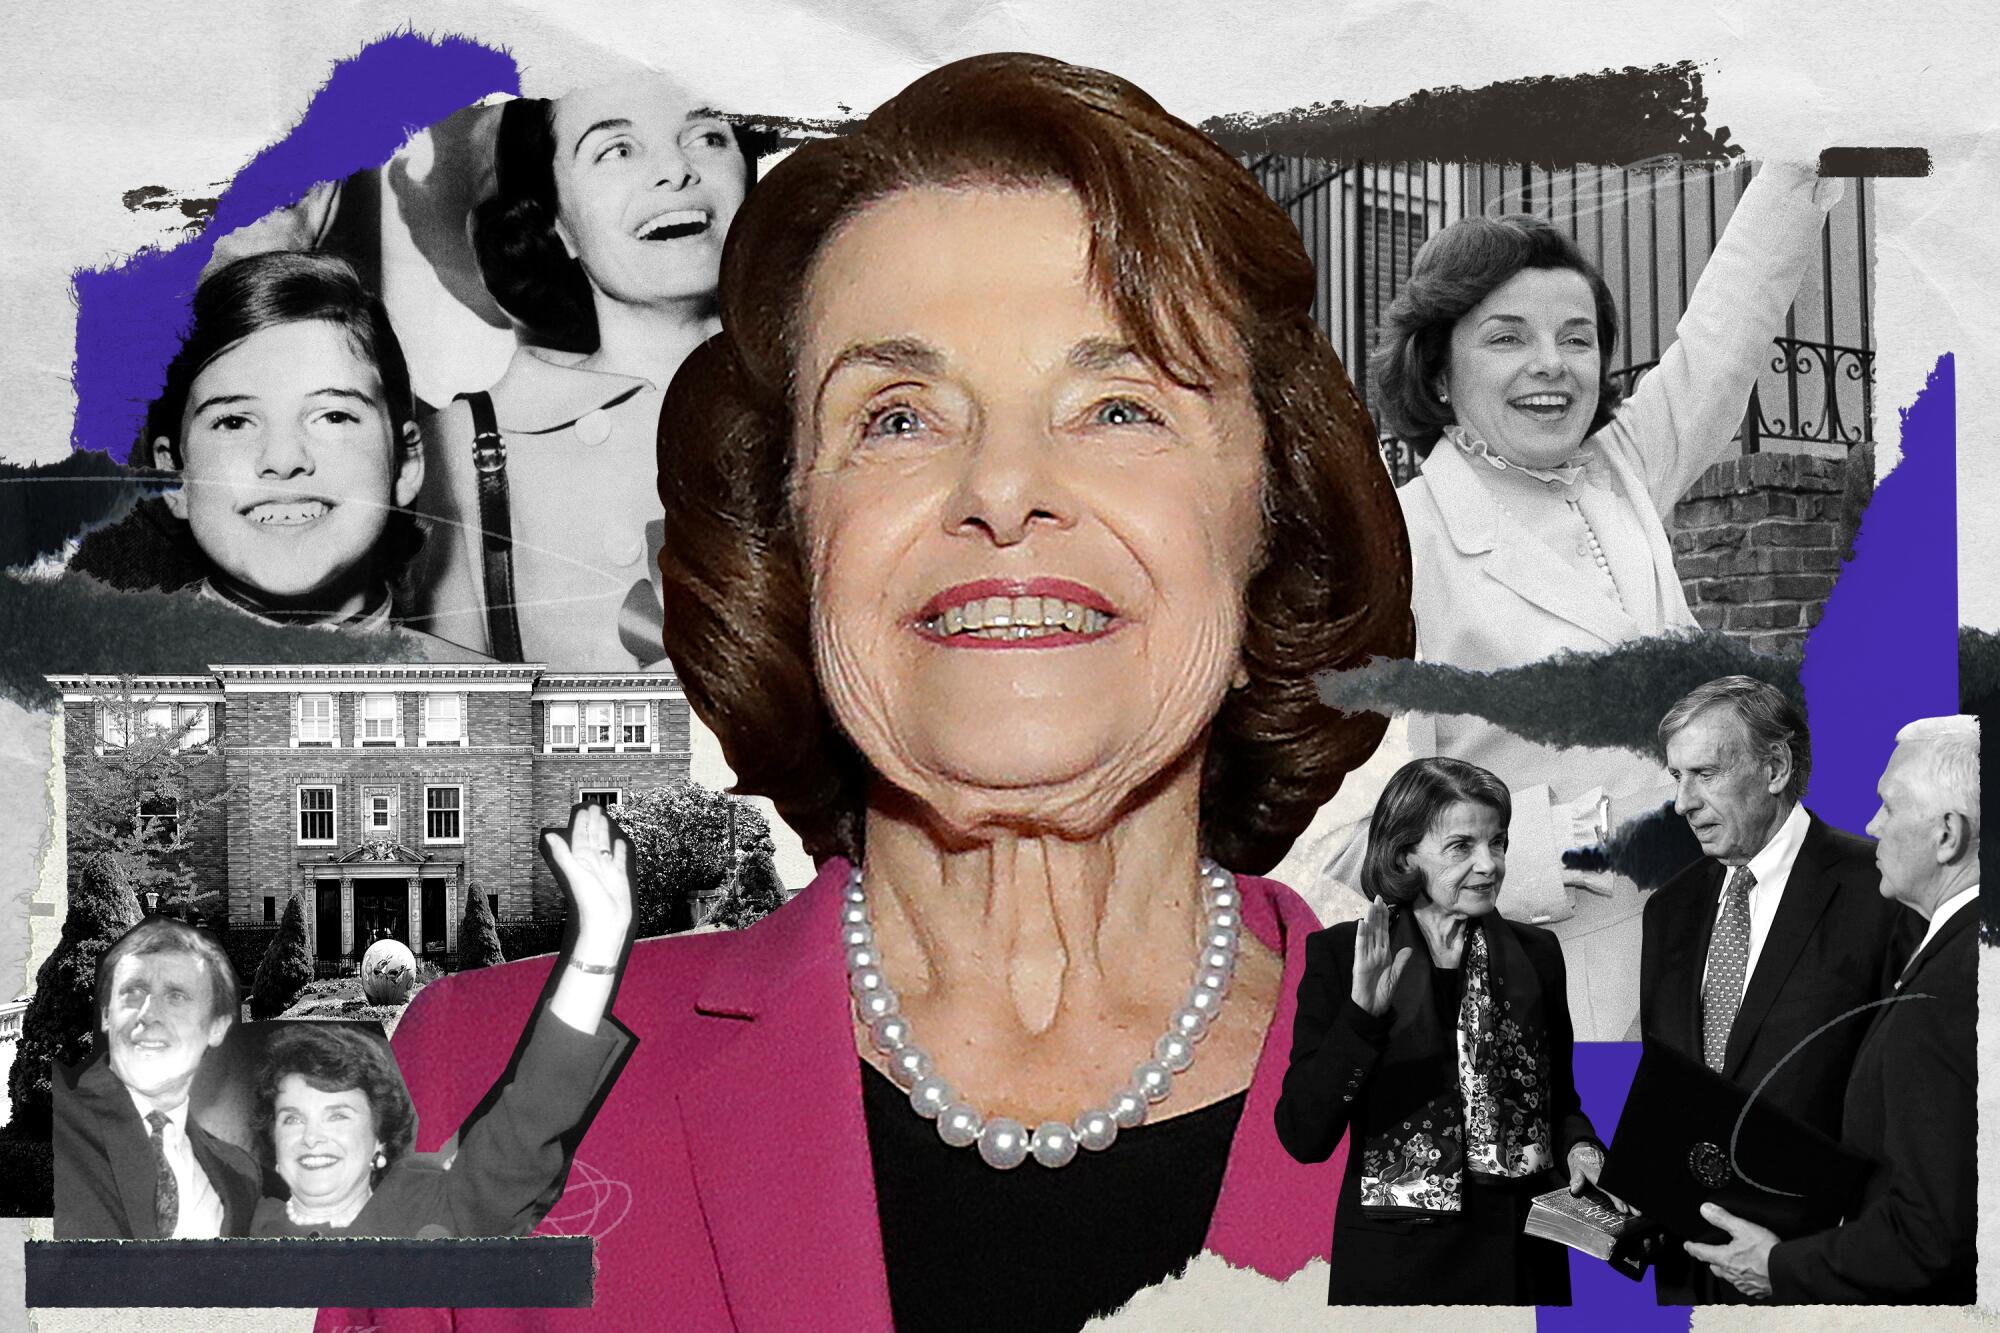 A photo collage with a color portrait of Dianne Feinstein surrounded by black-and-white photos from her life and career